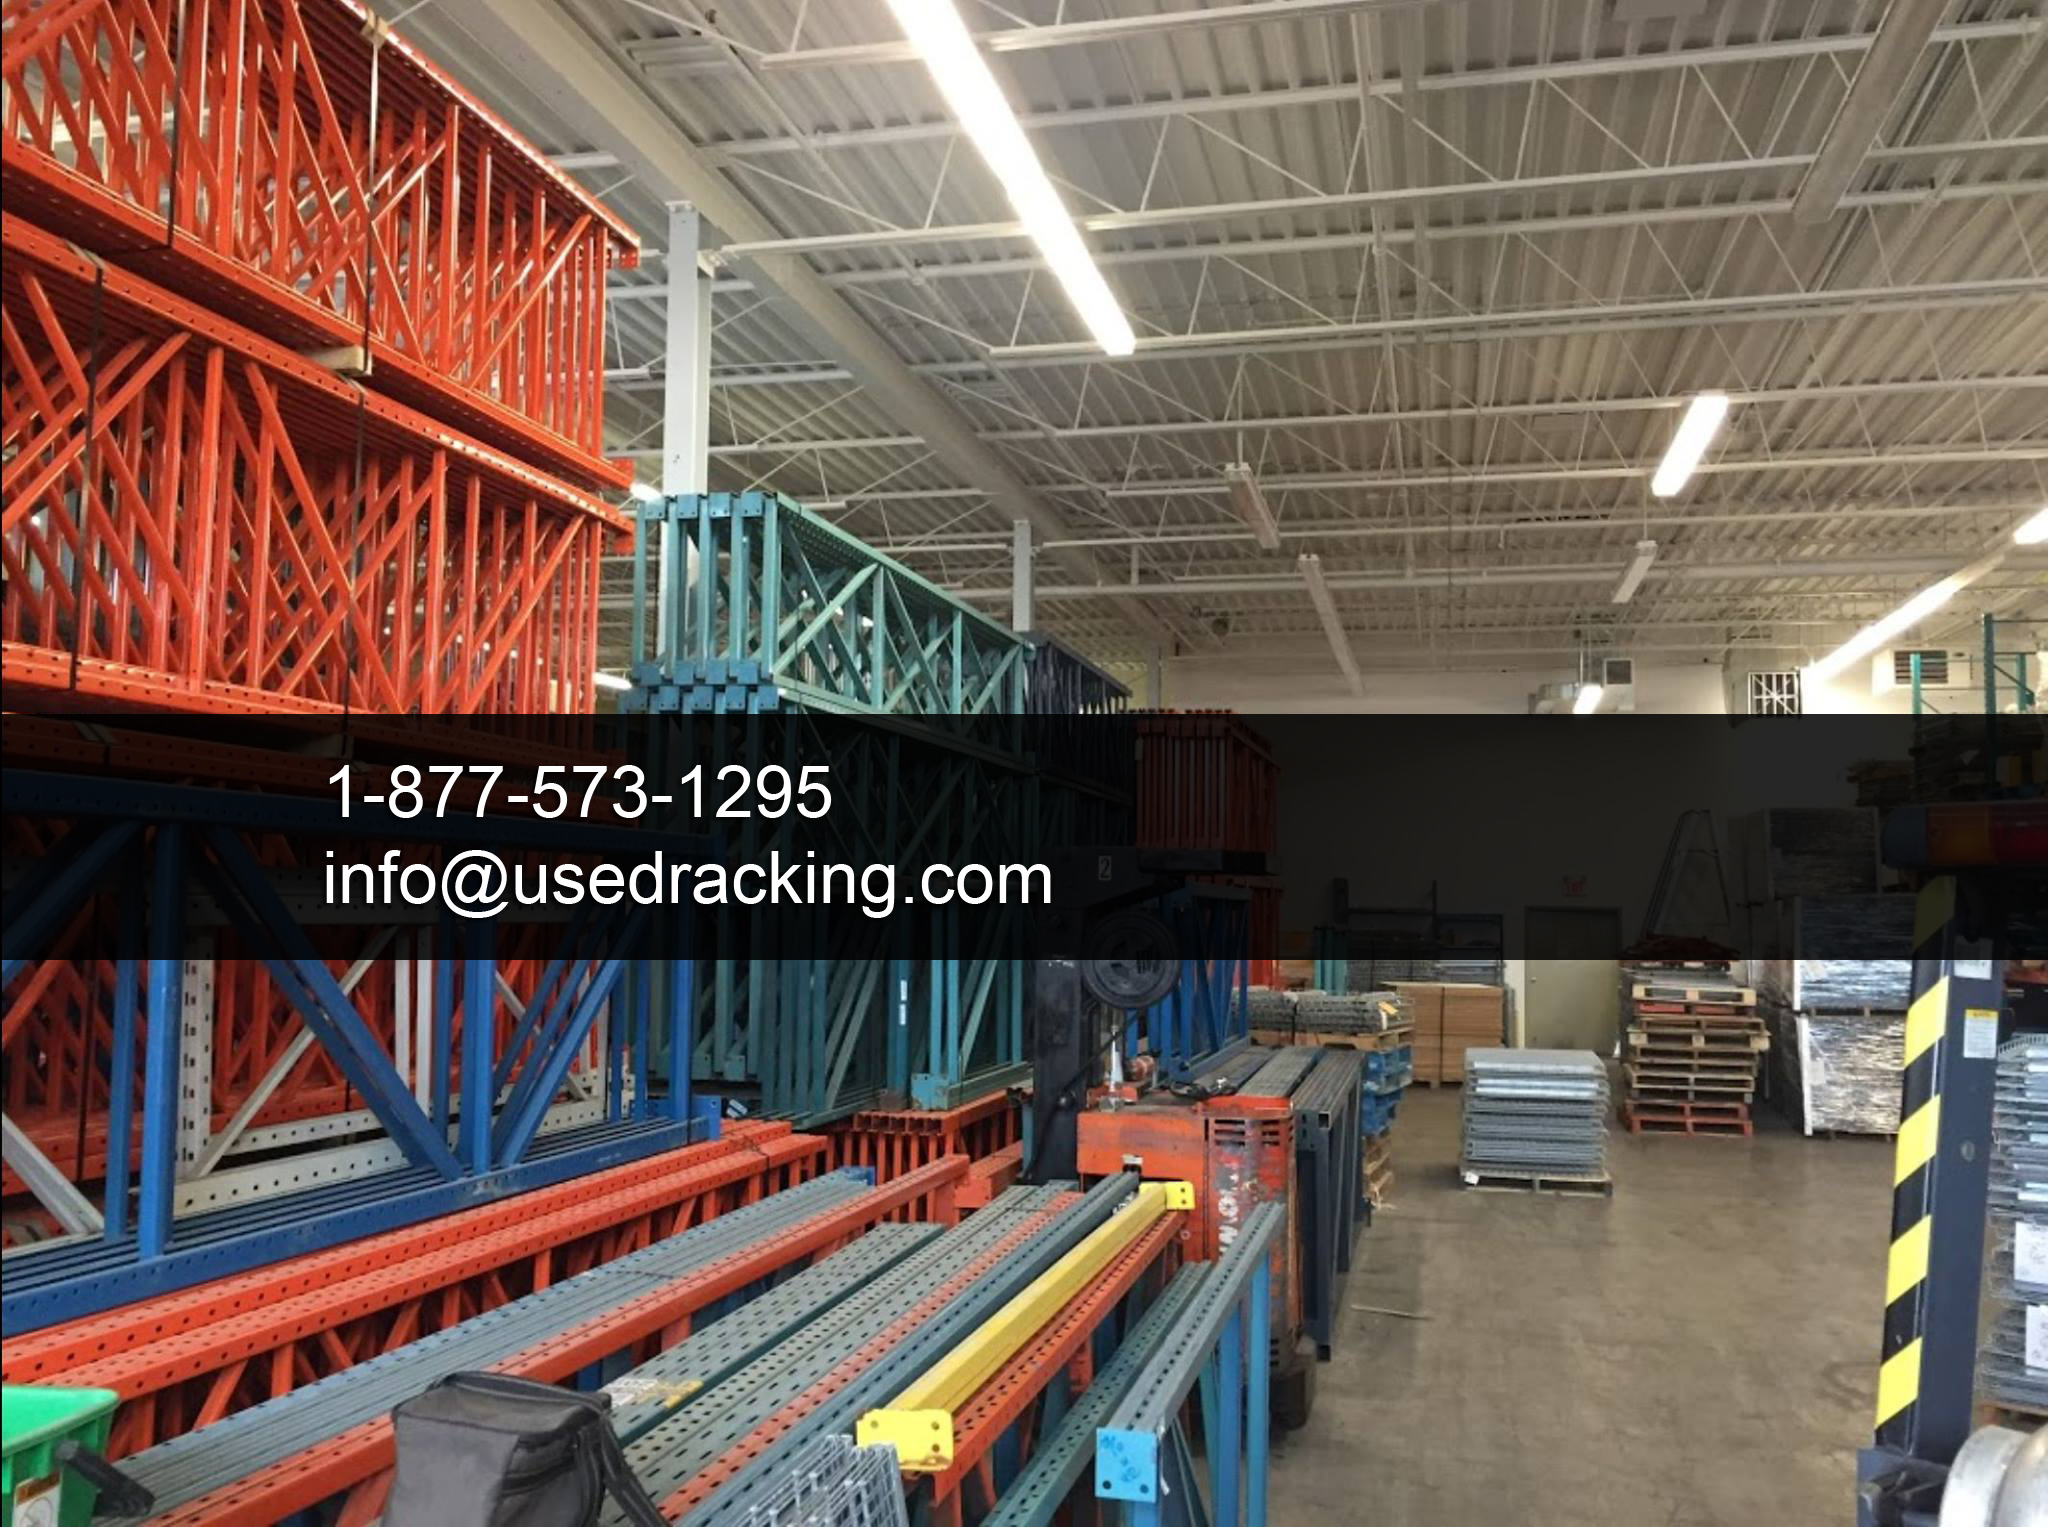 used racking in stock from usedracking.com